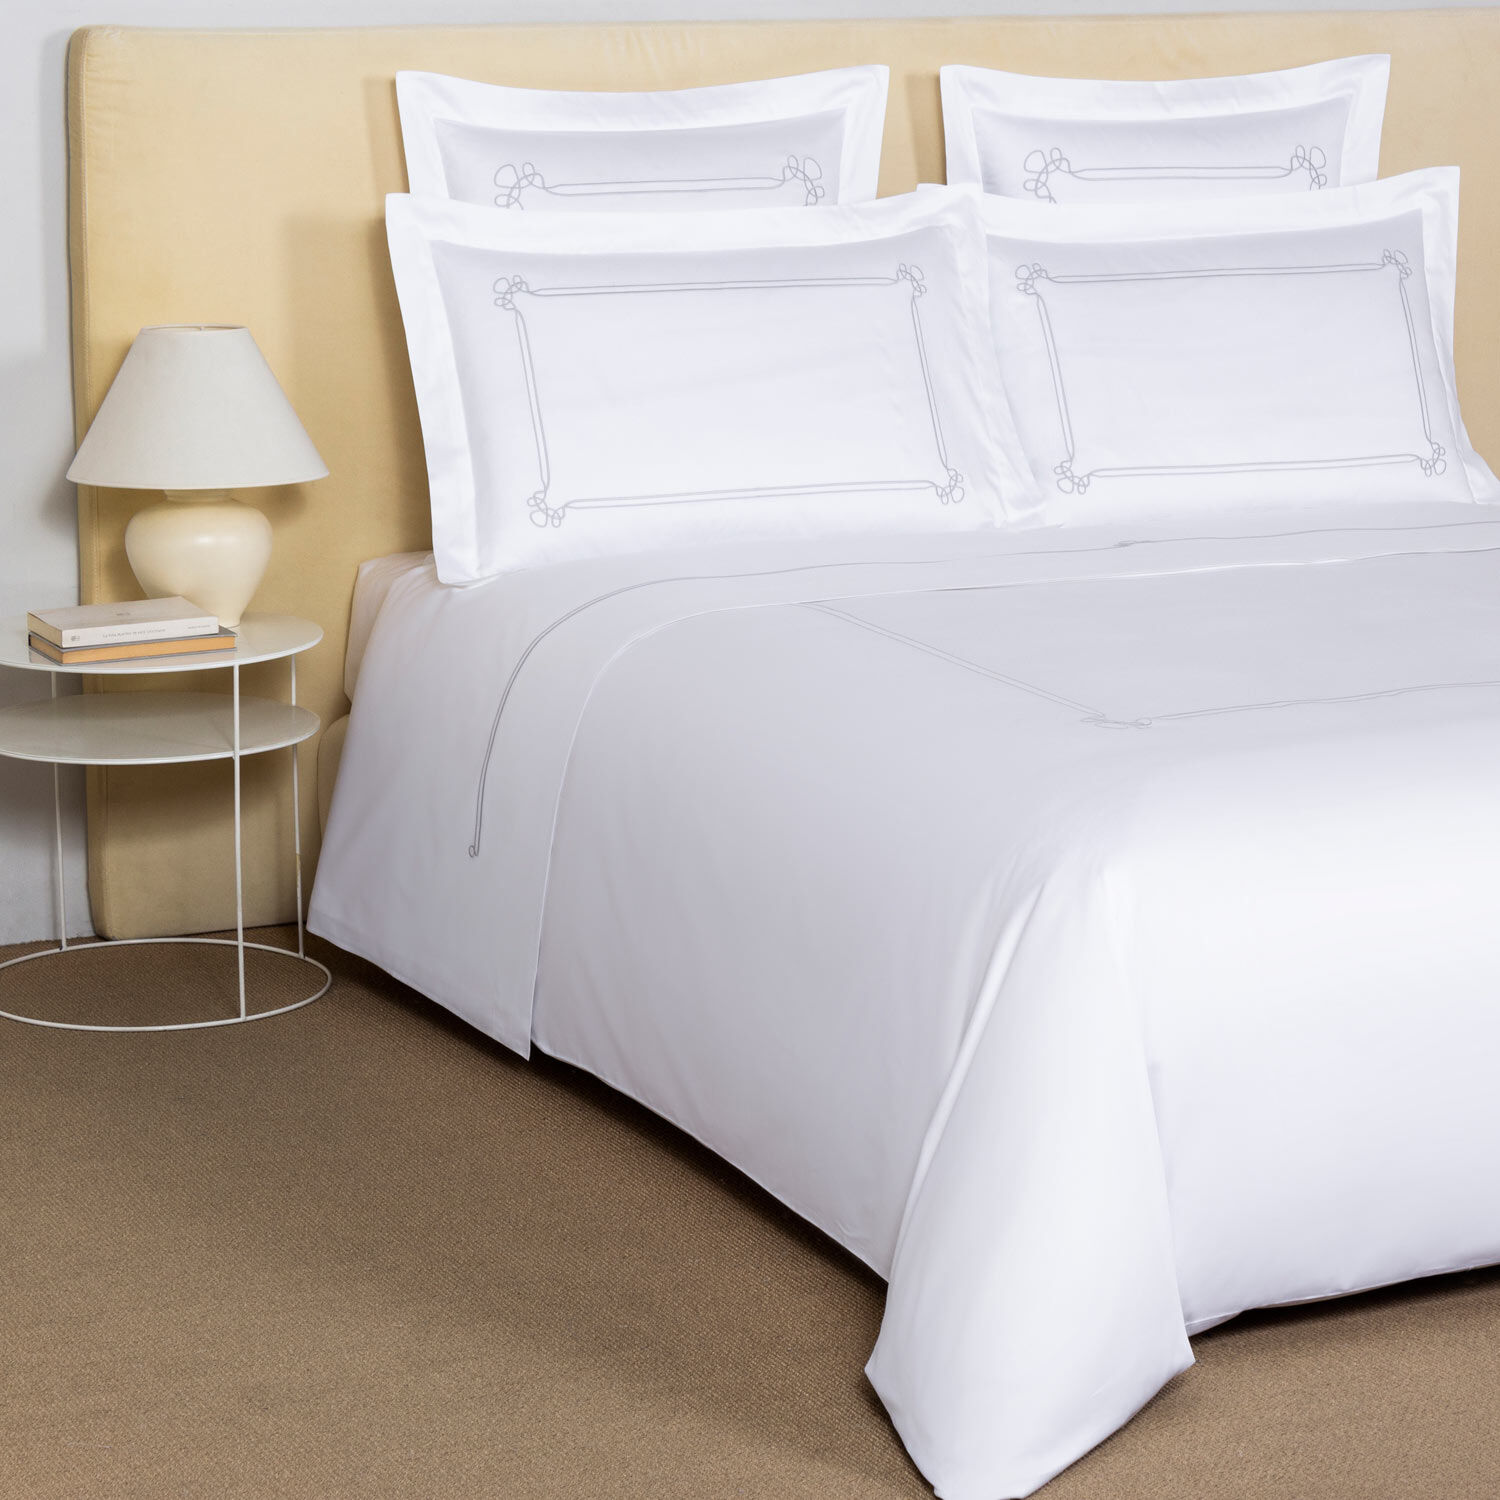 slide 4 Sirmione Embroidered Duvet Cover